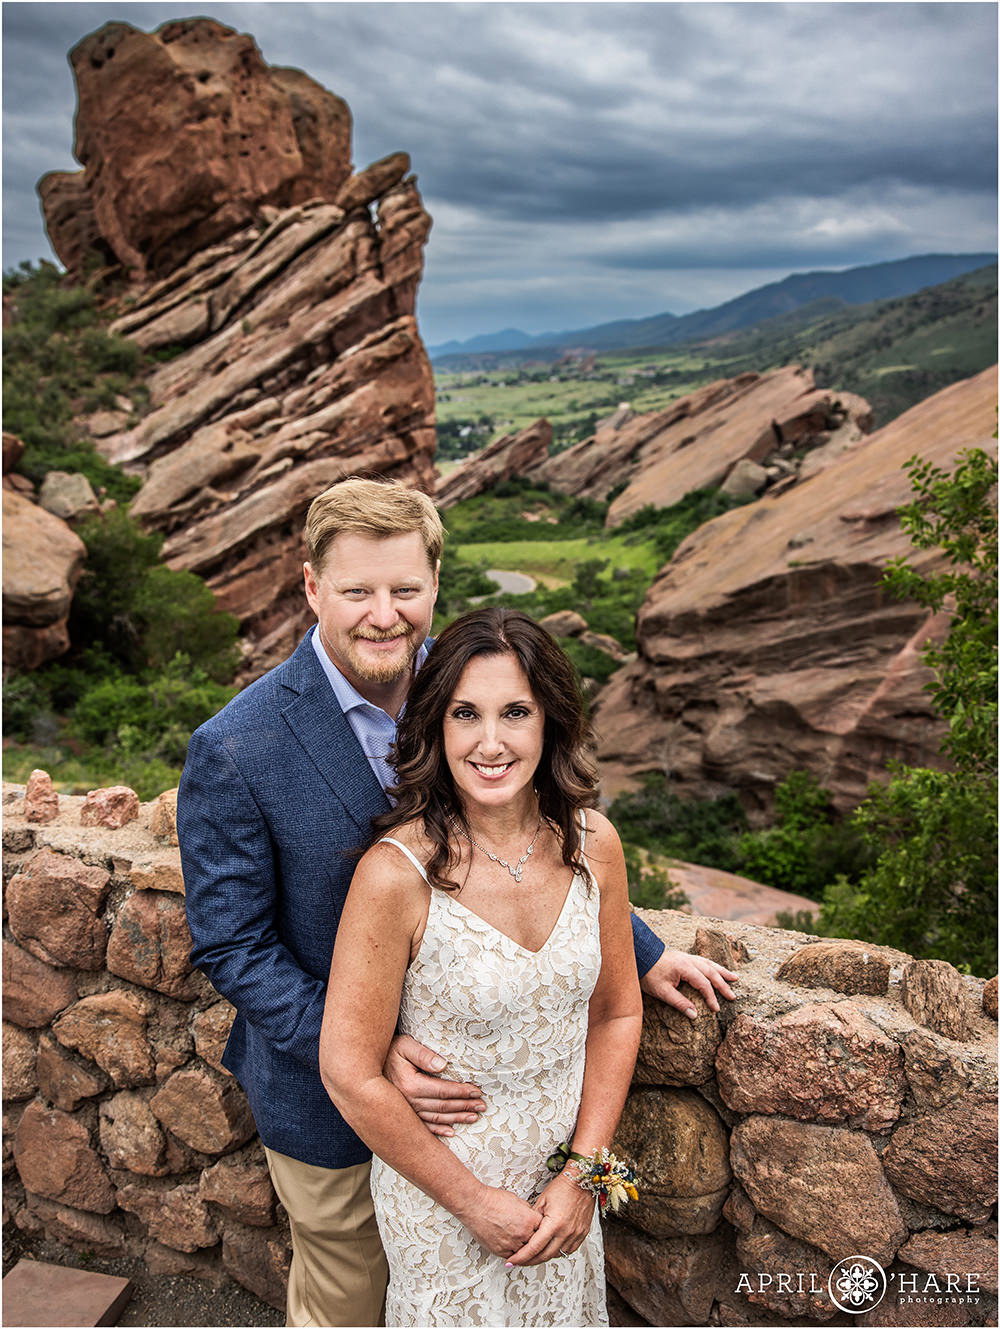 Couple pose for a simple wedding portrait at Red Rocks Trading Post on a stormy summer evening